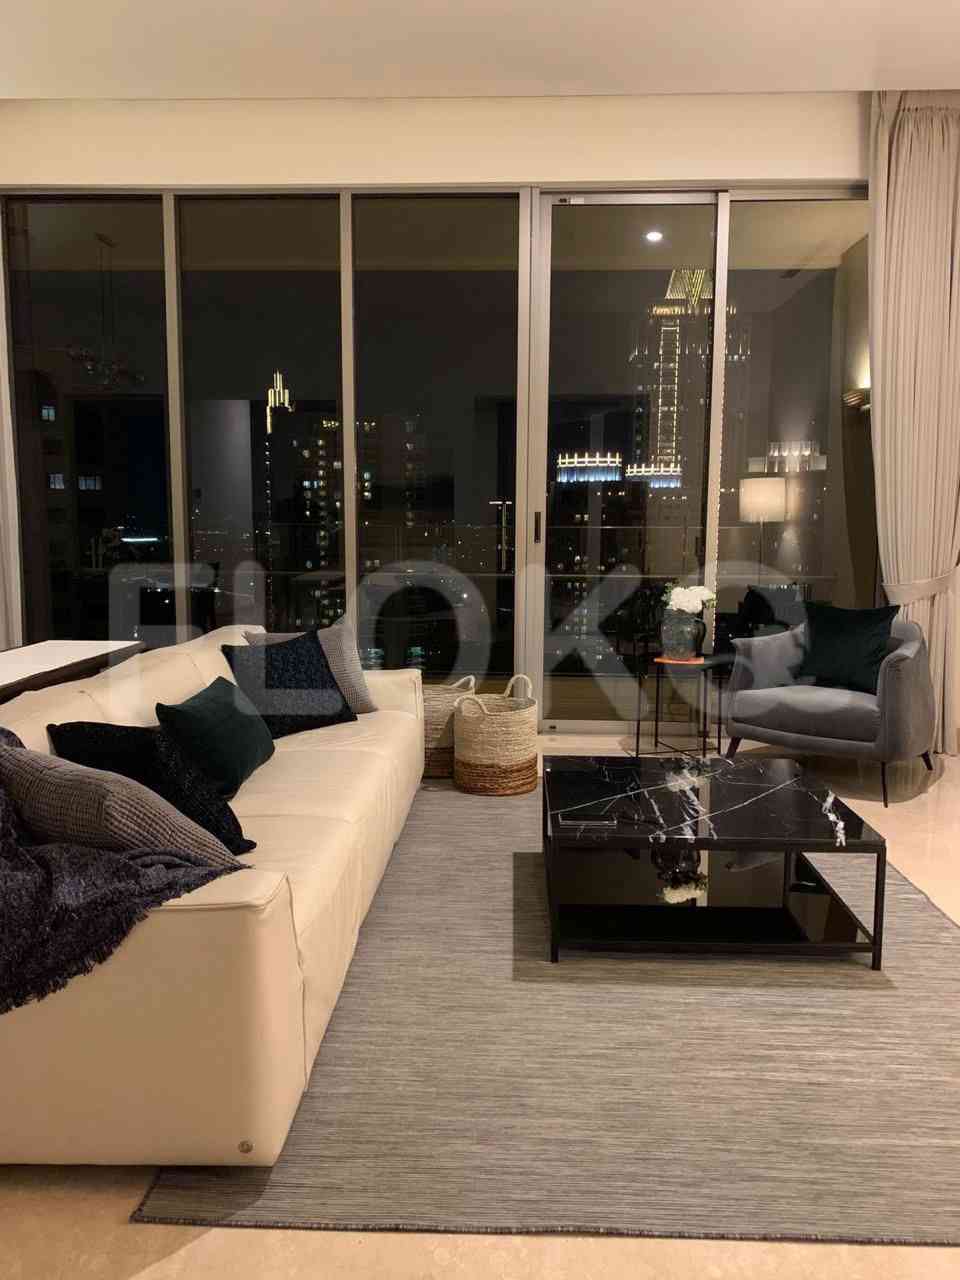 2 Bedroom on 18th Floor for Rent in Pakubuwono Spring Apartment - fga597 2